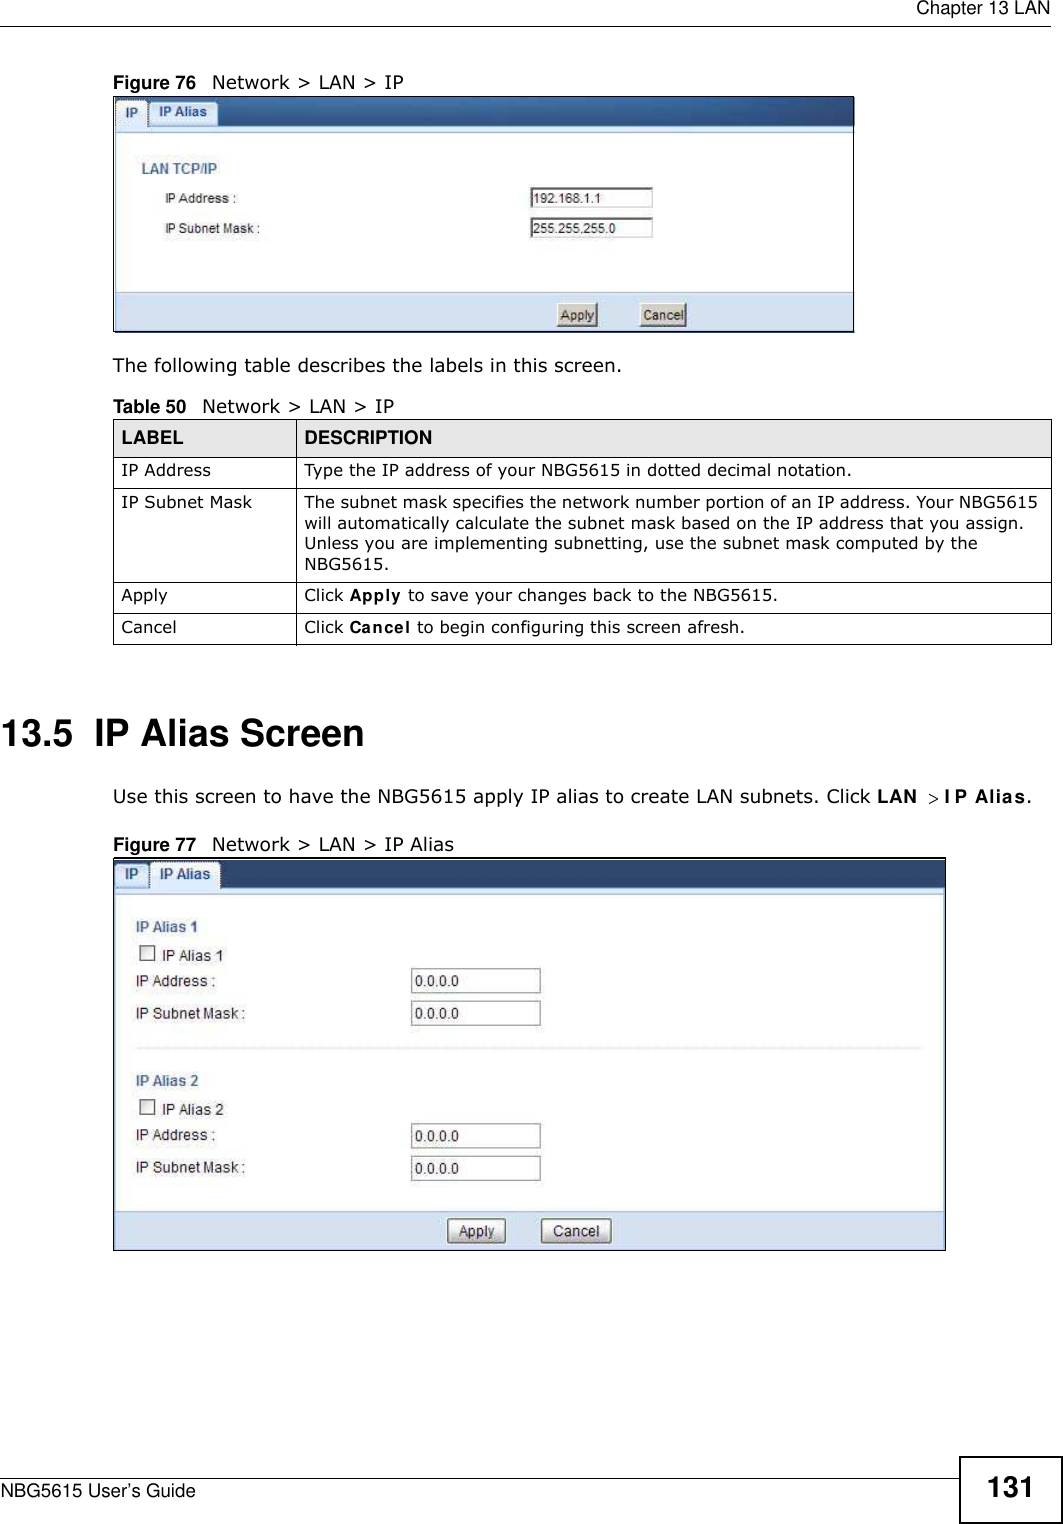  Chapter 13 LANNBG5615 User’s Guide 131Figure 76   Network &gt; LAN &gt; IP The following table describes the labels in this screen.13.5  IP Alias ScreenUse this screen to have the NBG5615 apply IP alias to create LAN subnets. Click LAN I P Alias.Figure 77   Network &gt; LAN &gt; IP Alias Table 50   Network &gt; LAN &gt; IPLABEL DESCRIPTIONIP Address Type the IP address of your NBG5615 in dotted decimal notation.IP Subnet Mask The subnet mask specifies the network number portion of an IP address. Your NBG5615 will automatically calculate the subnet mask based on the IP address that you assign. Unless you are implementing subnetting, use the subnet mask computed by the NBG5615.Apply Click Apply to save your changes back to the NBG5615.Cancel Click Cancel to begin configuring this screen afresh.